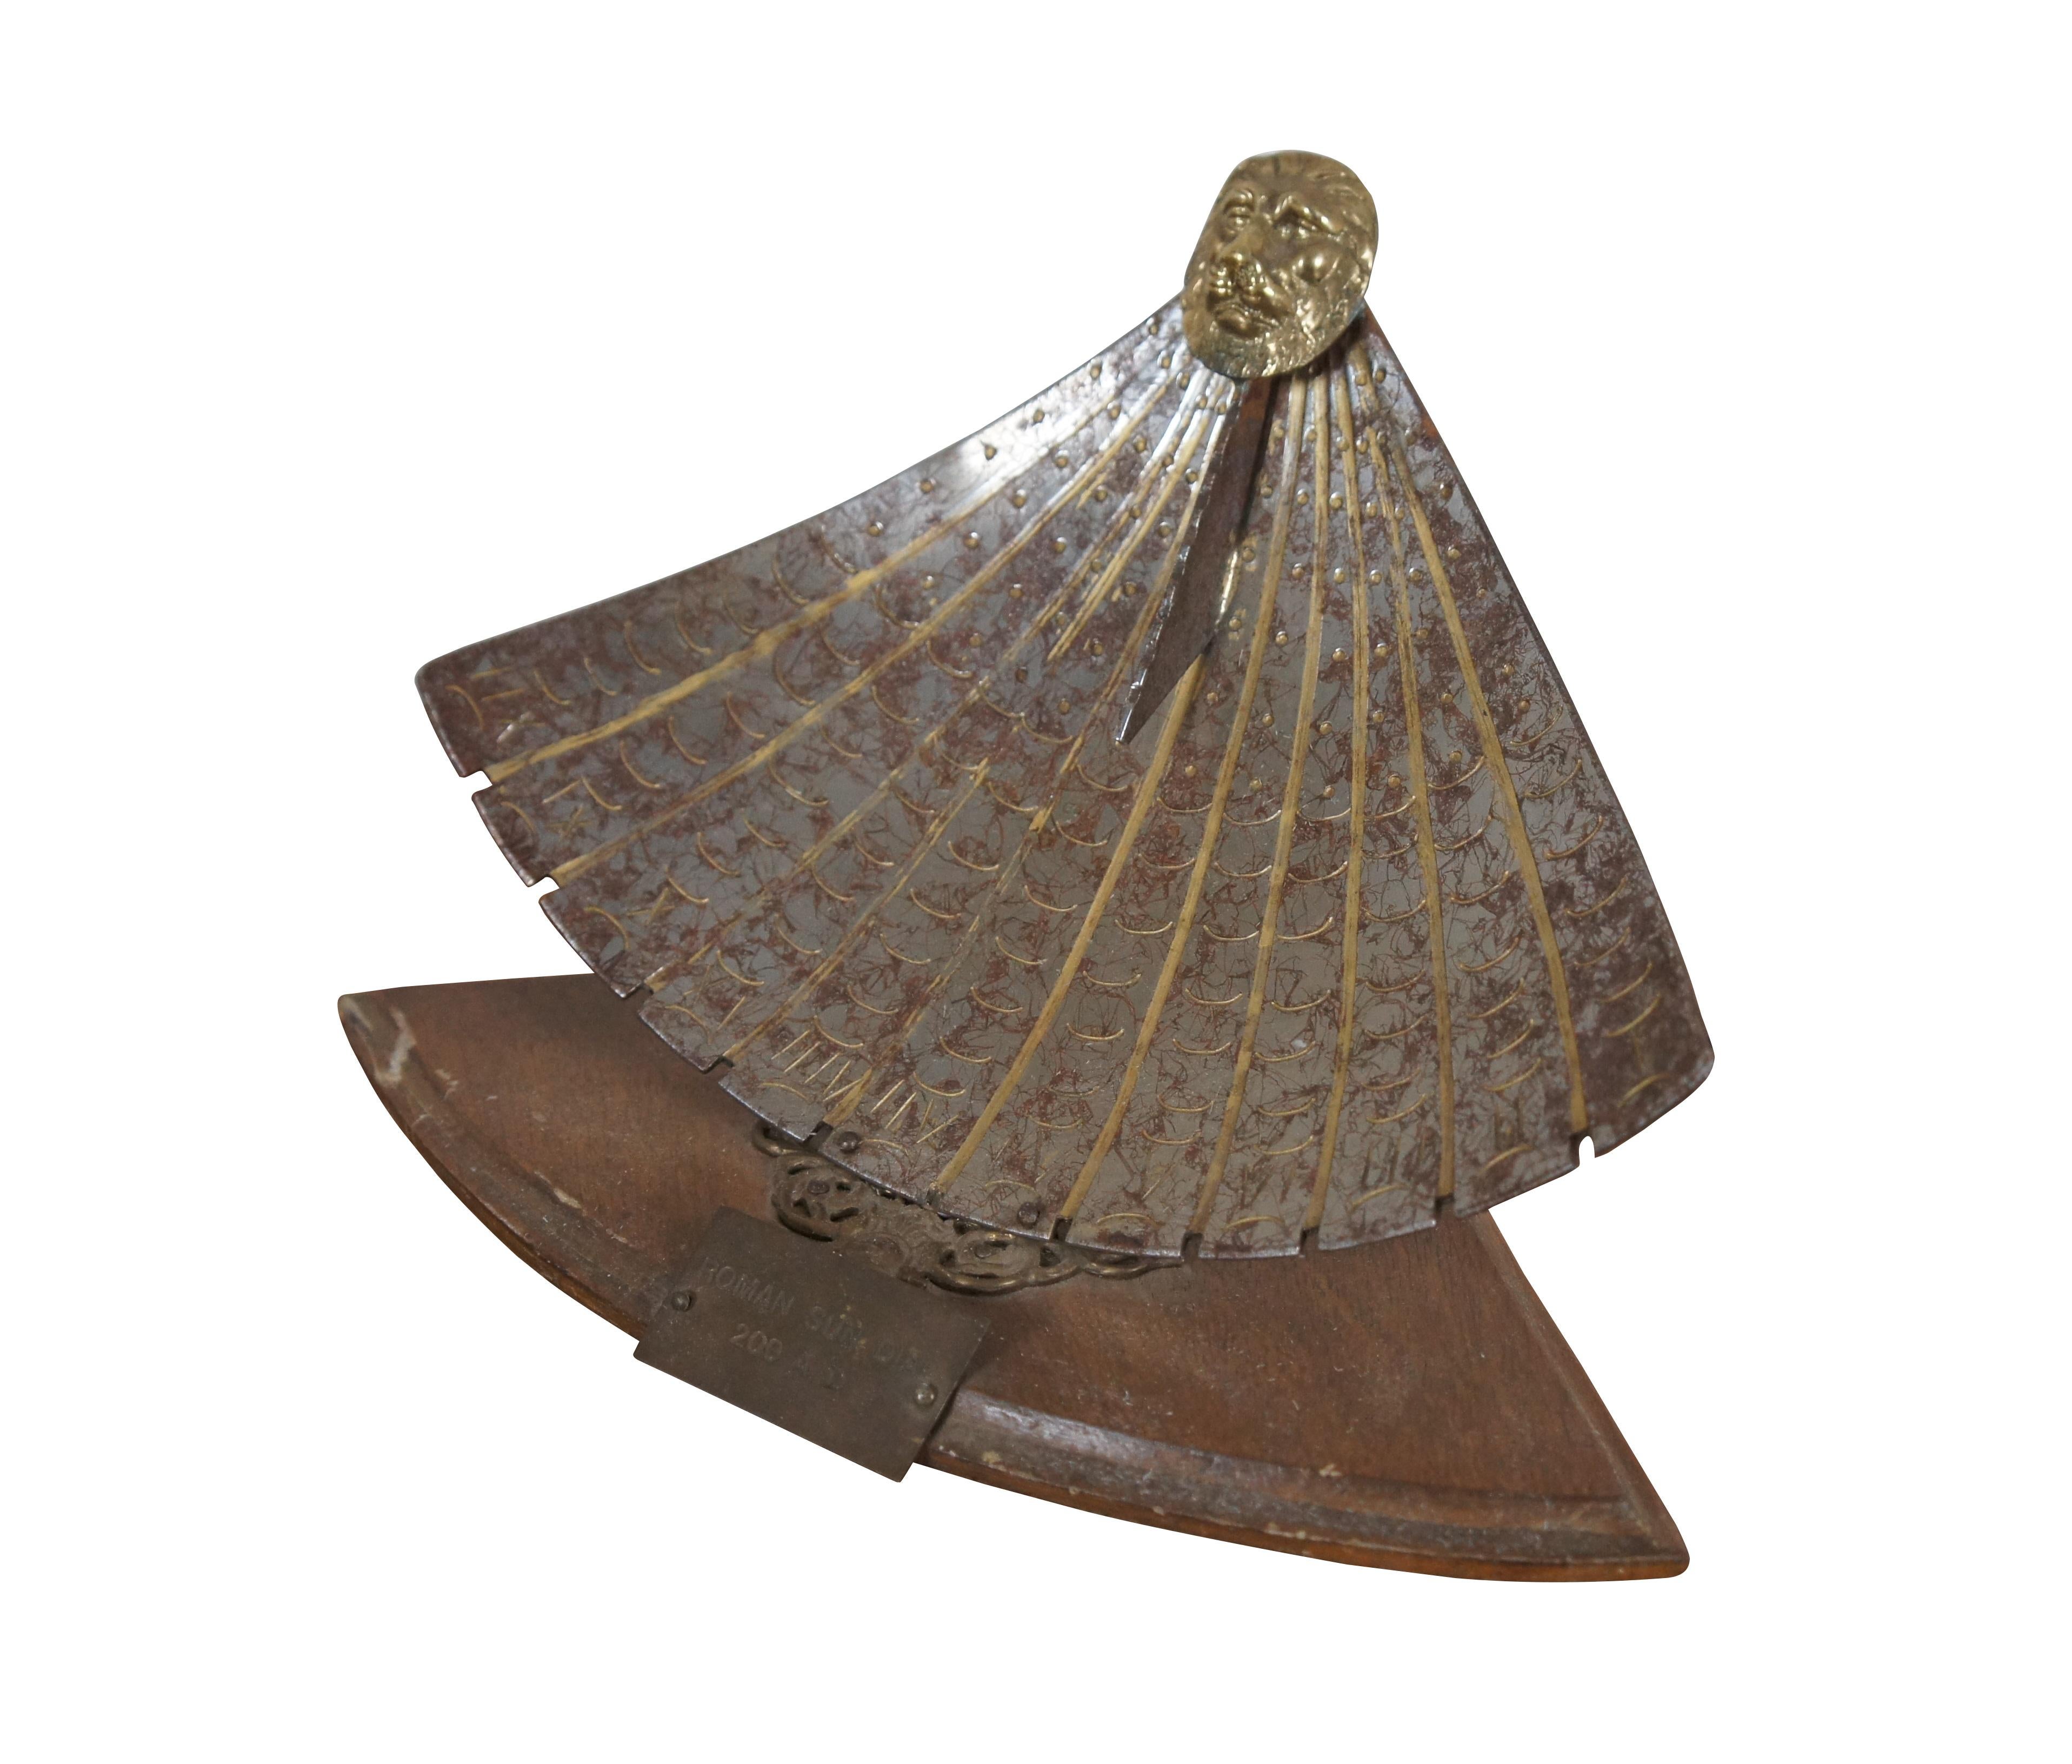 Mid 20th century sounvenir reproduction of an ancient Roman sun dial. Fan shaped metal dial plate, decoratively aged, with etched / gilded rays and Roman numerals indicating the hours, gnomon capped with a gilt lion's head. Mounted on a fan shape